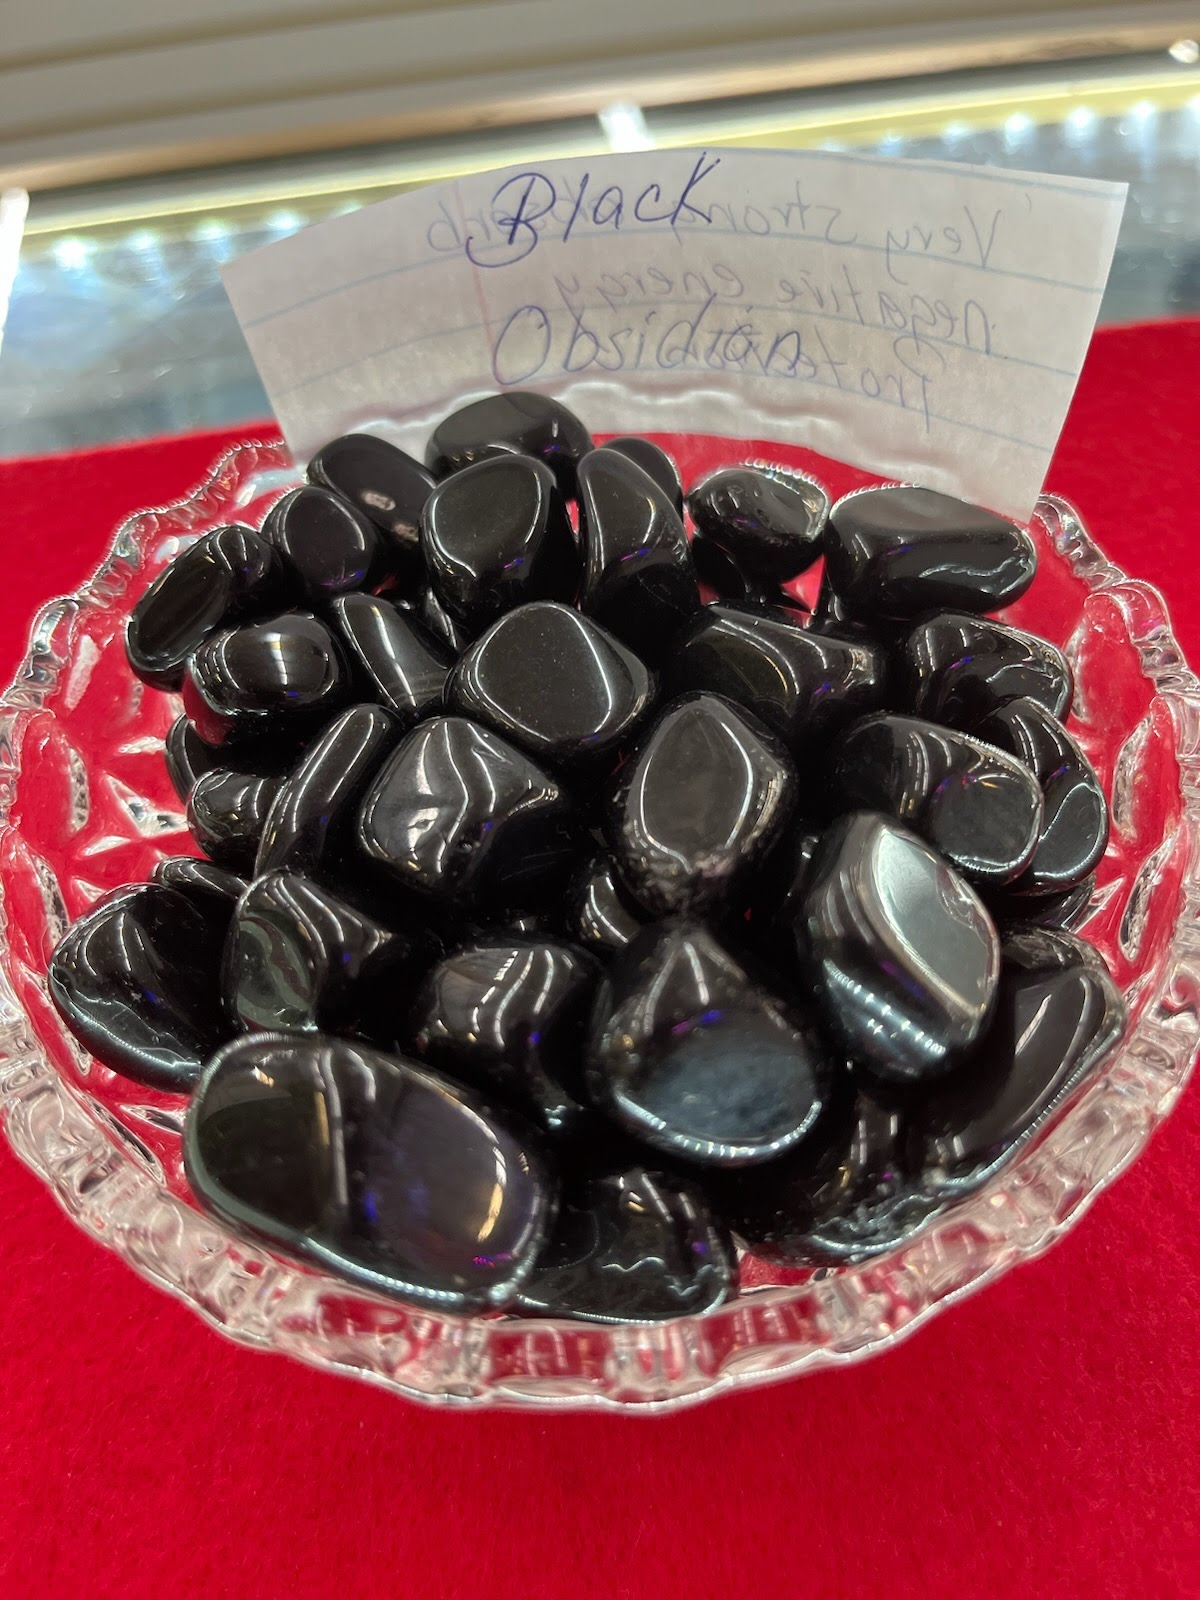 A bowl of black rocks on top of a red table.